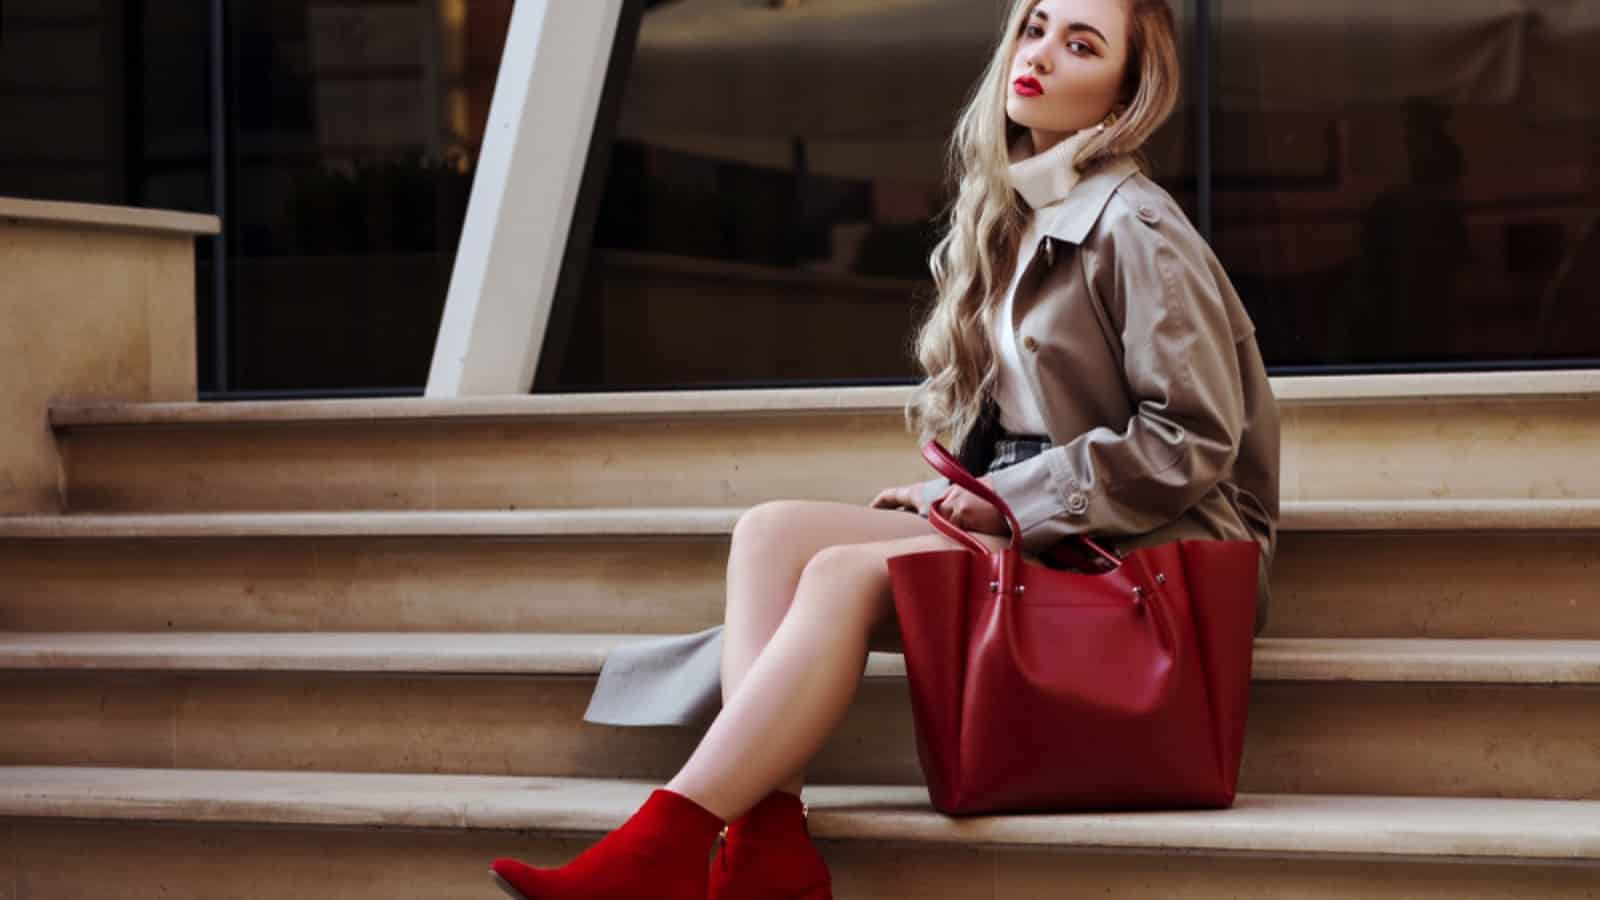 Woman with luxury handbag and shoes